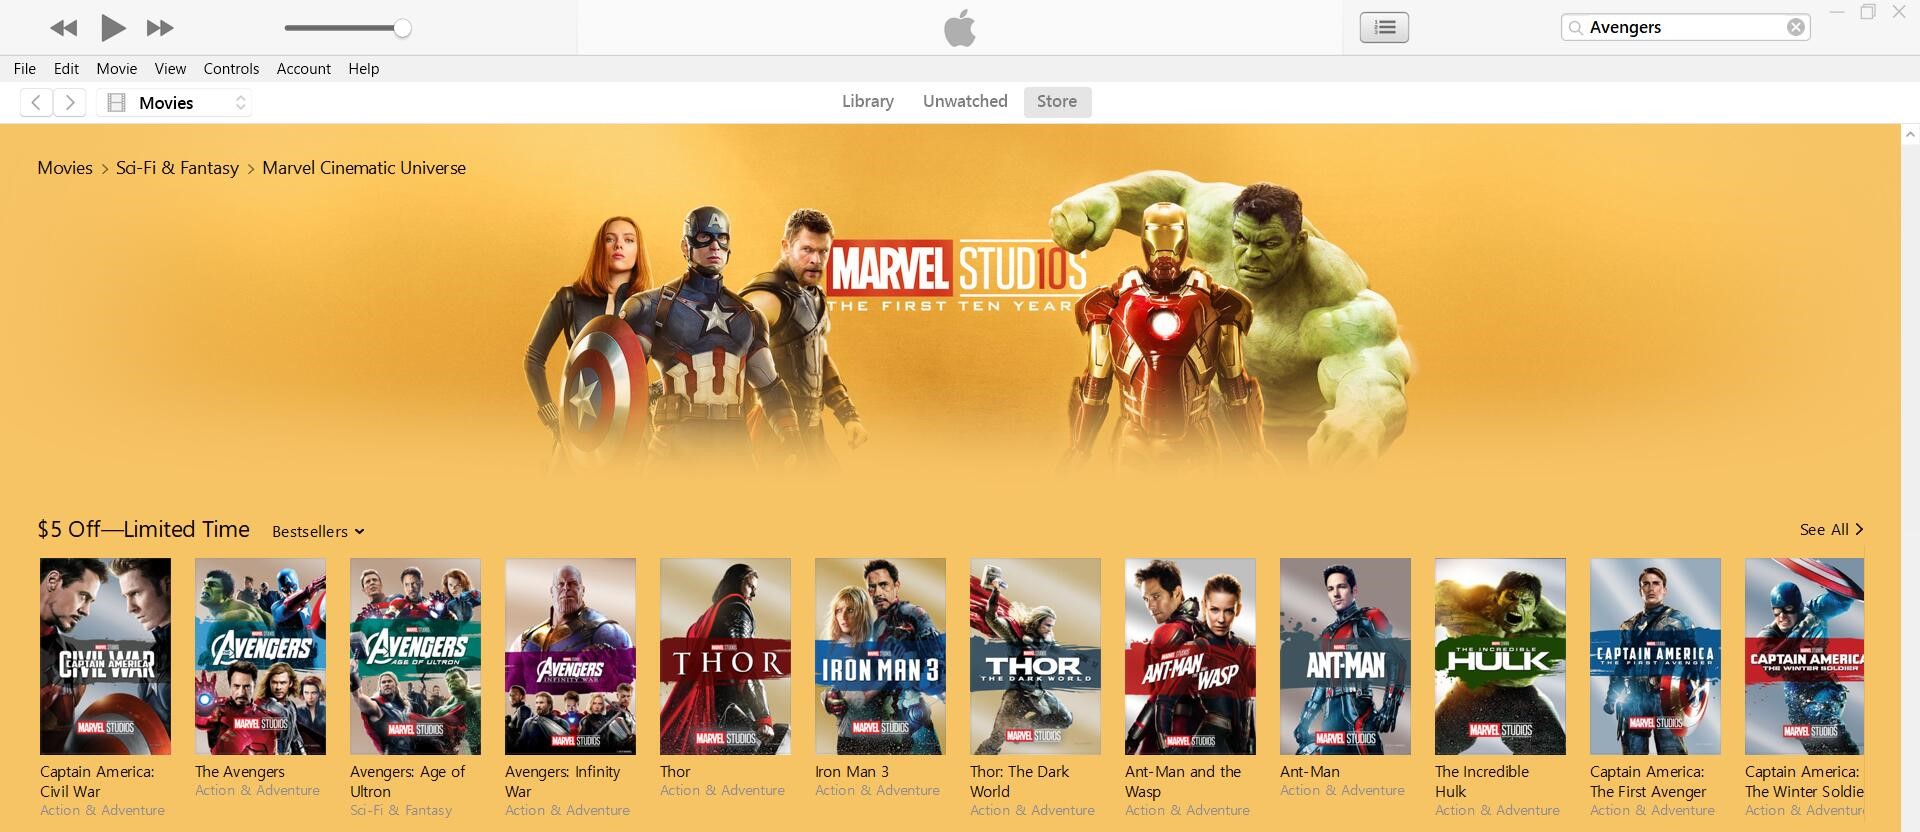 Watch the Marvel Movies on iTunes